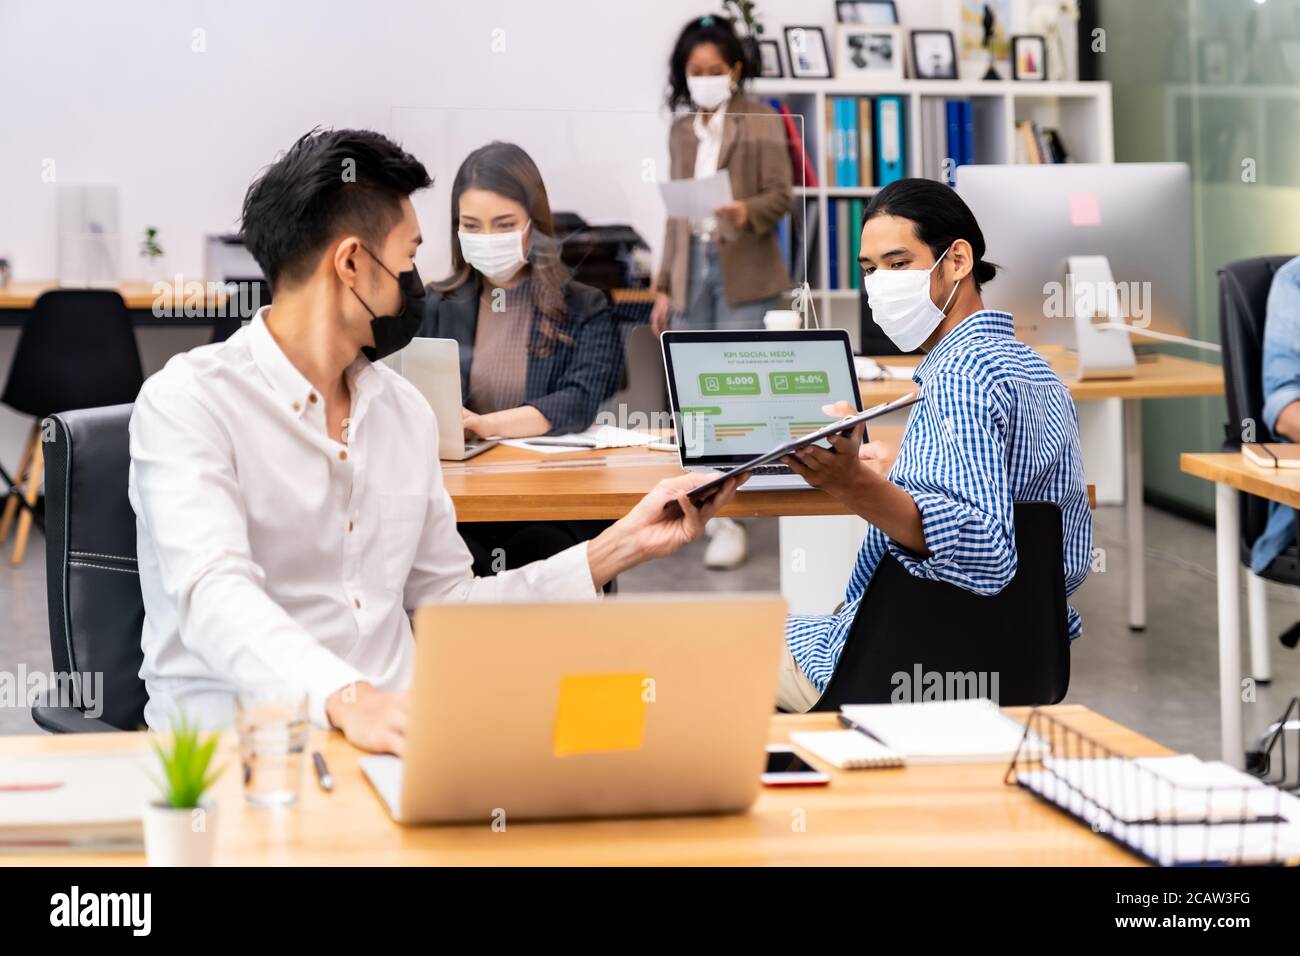 Group of interracial business worker team wear protective face mask in new normal office with social distance practice with hand sanitiser alcohol gel Stock Photo